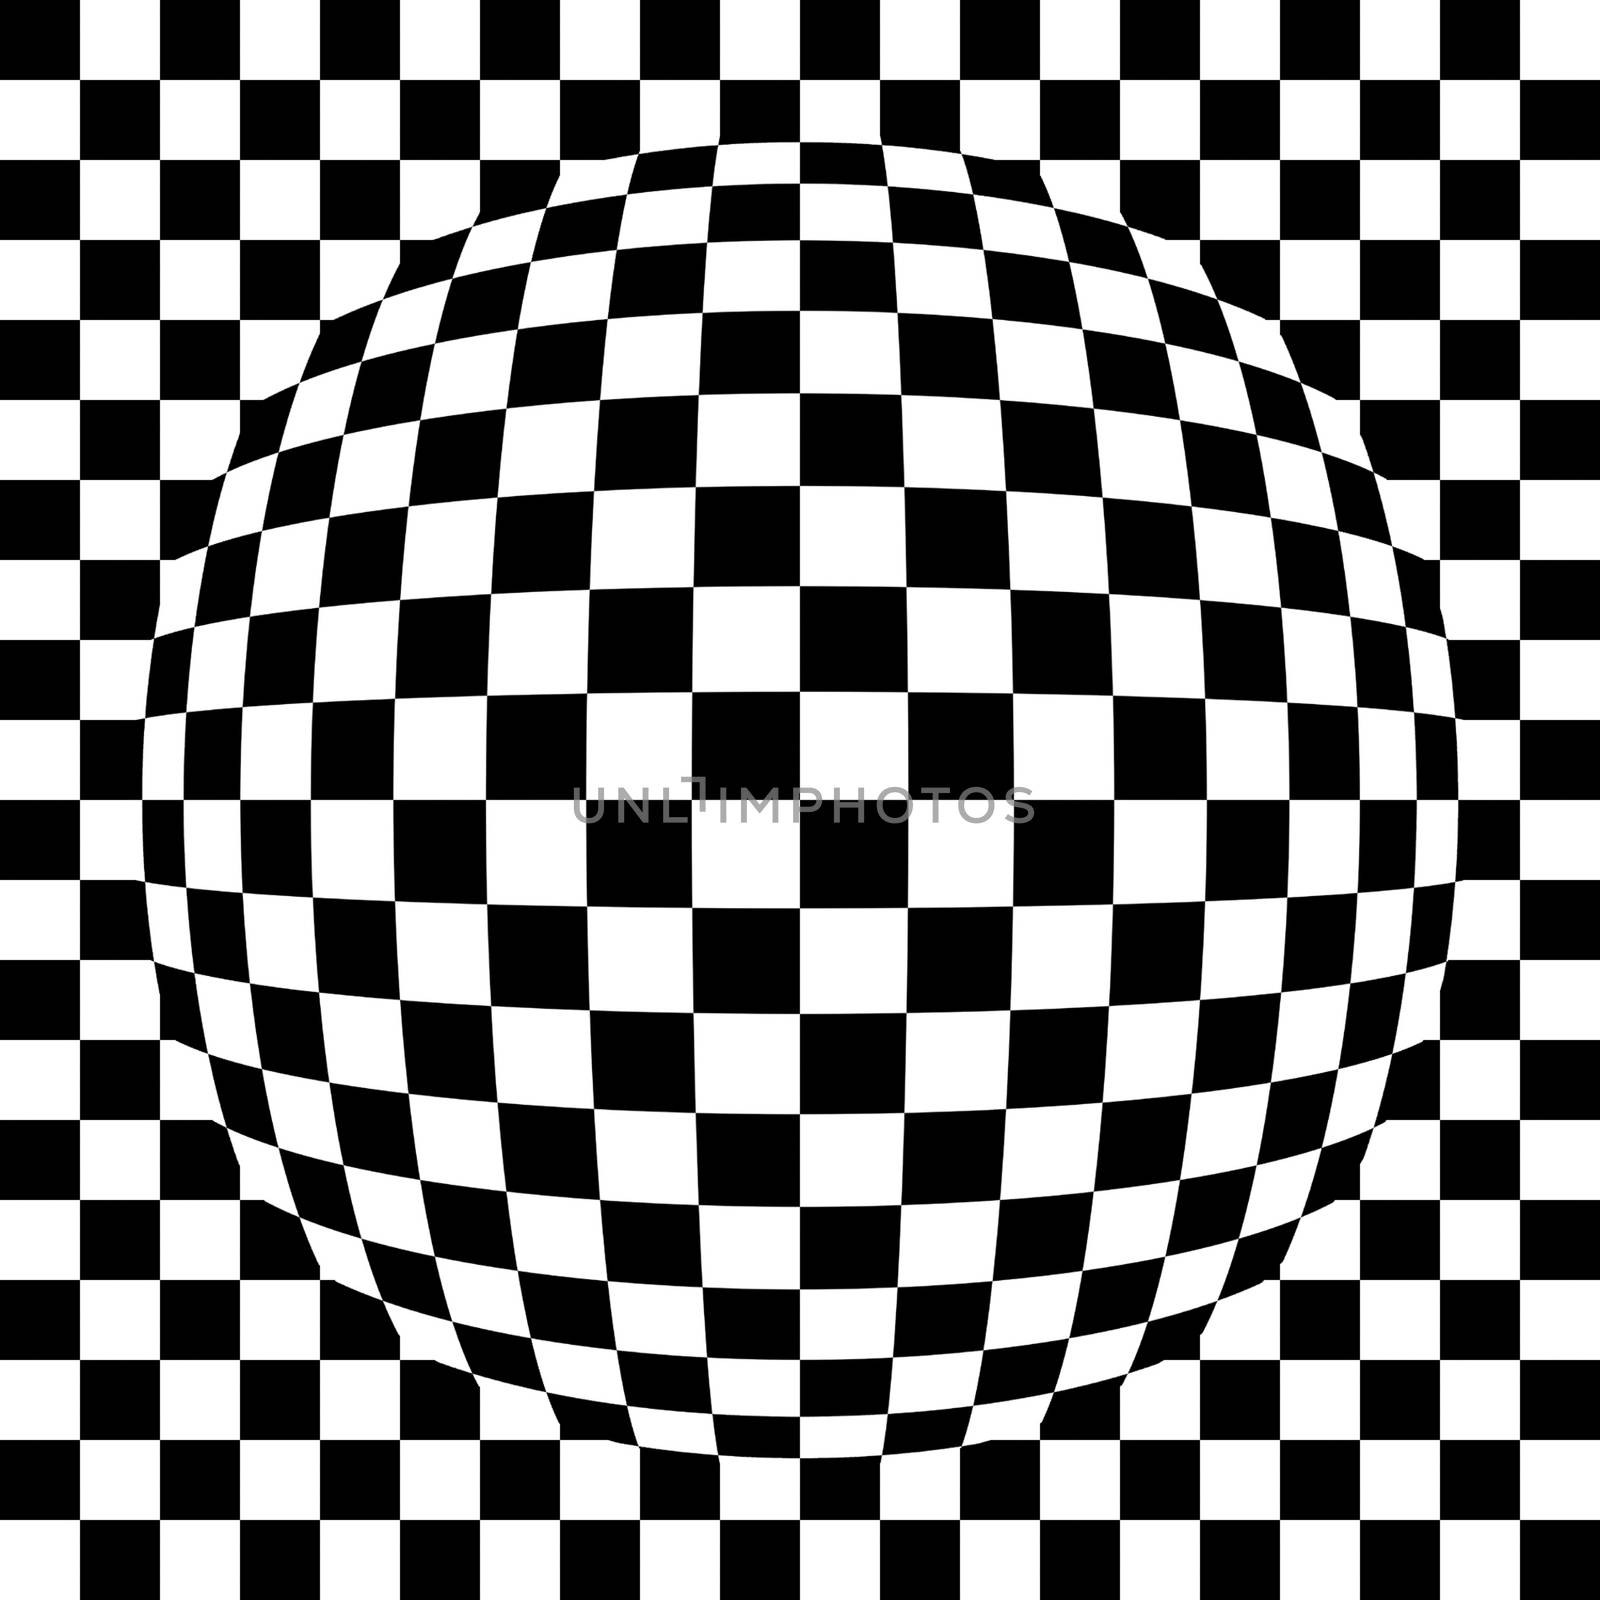 Illustration of spherical black and white squared pattern.